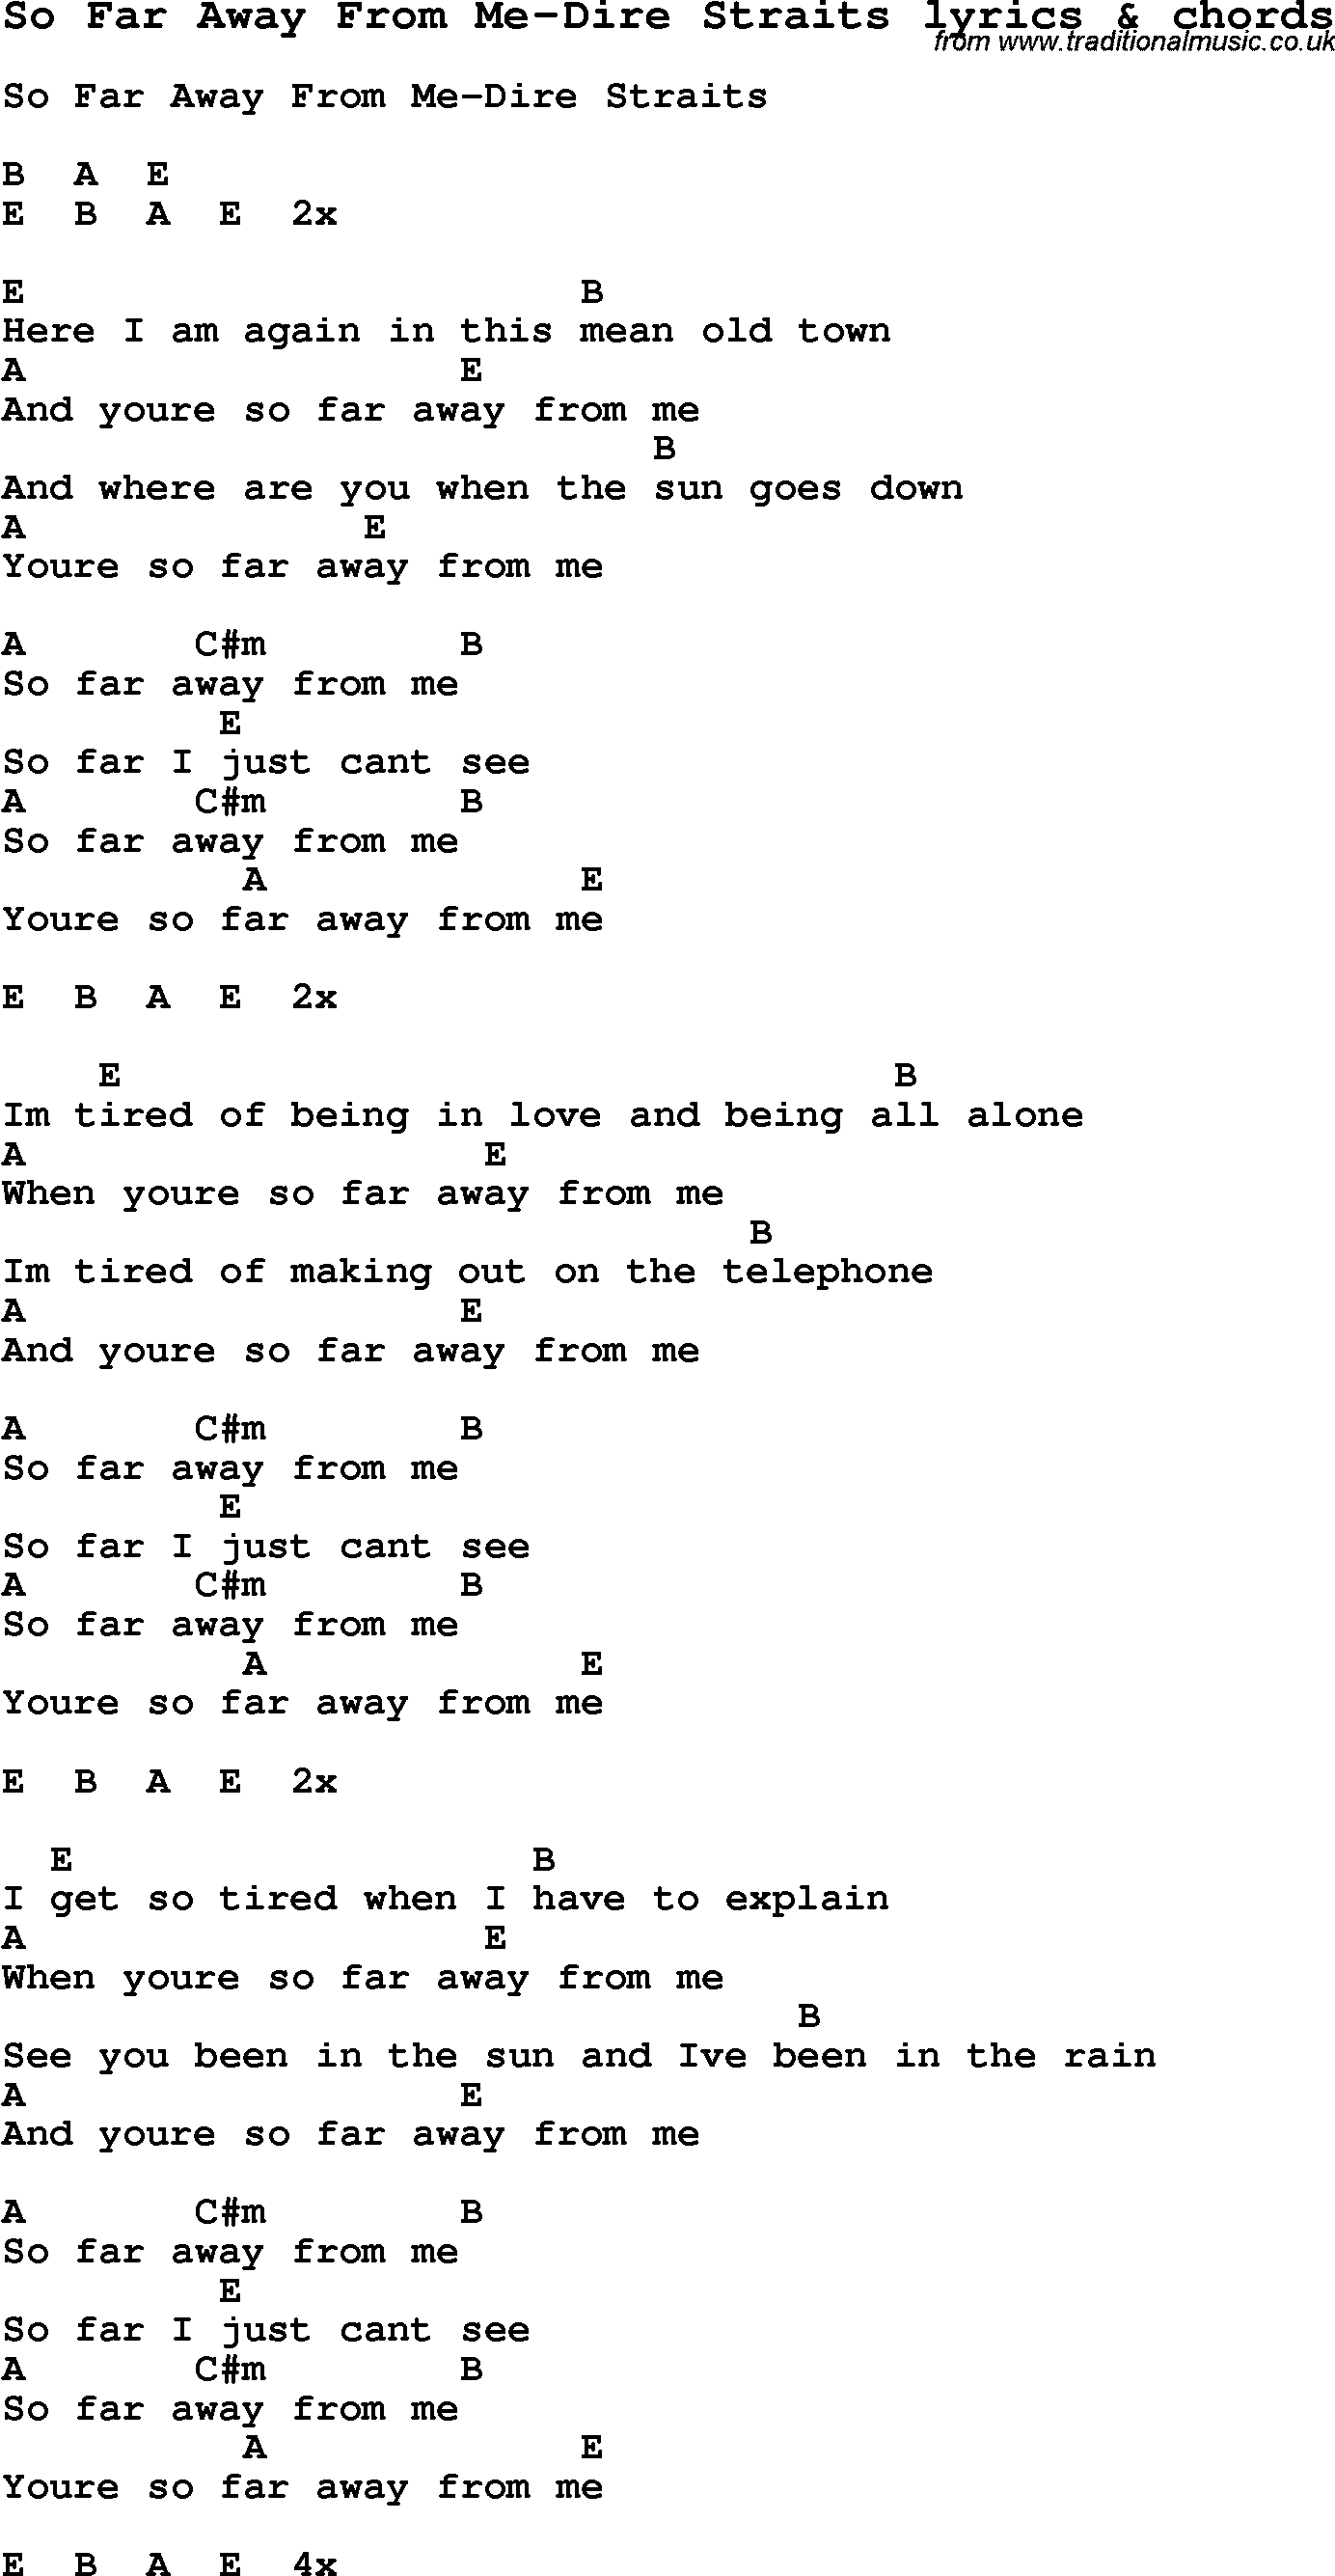 Love Song Lyrics for: So Far Away From Me-Dire Straits with chords for Ukulele, Guitar Banjo etc.